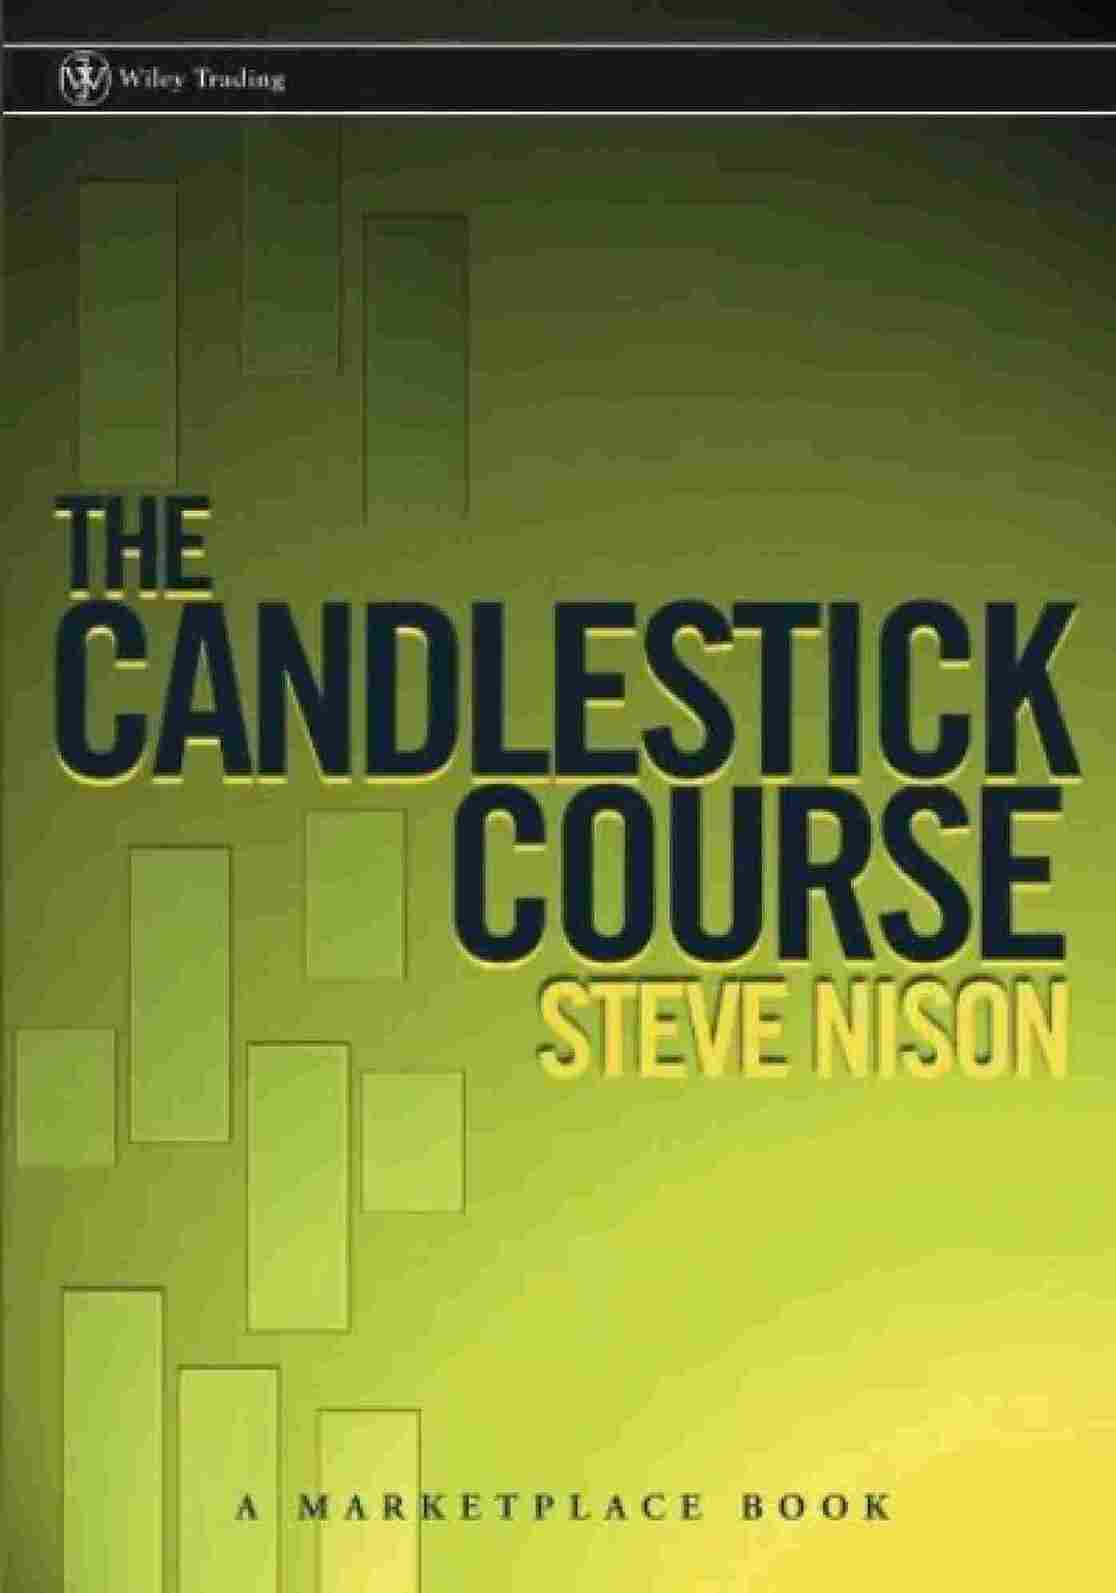 The Candlestick Course (Paperback) - Steve Nison